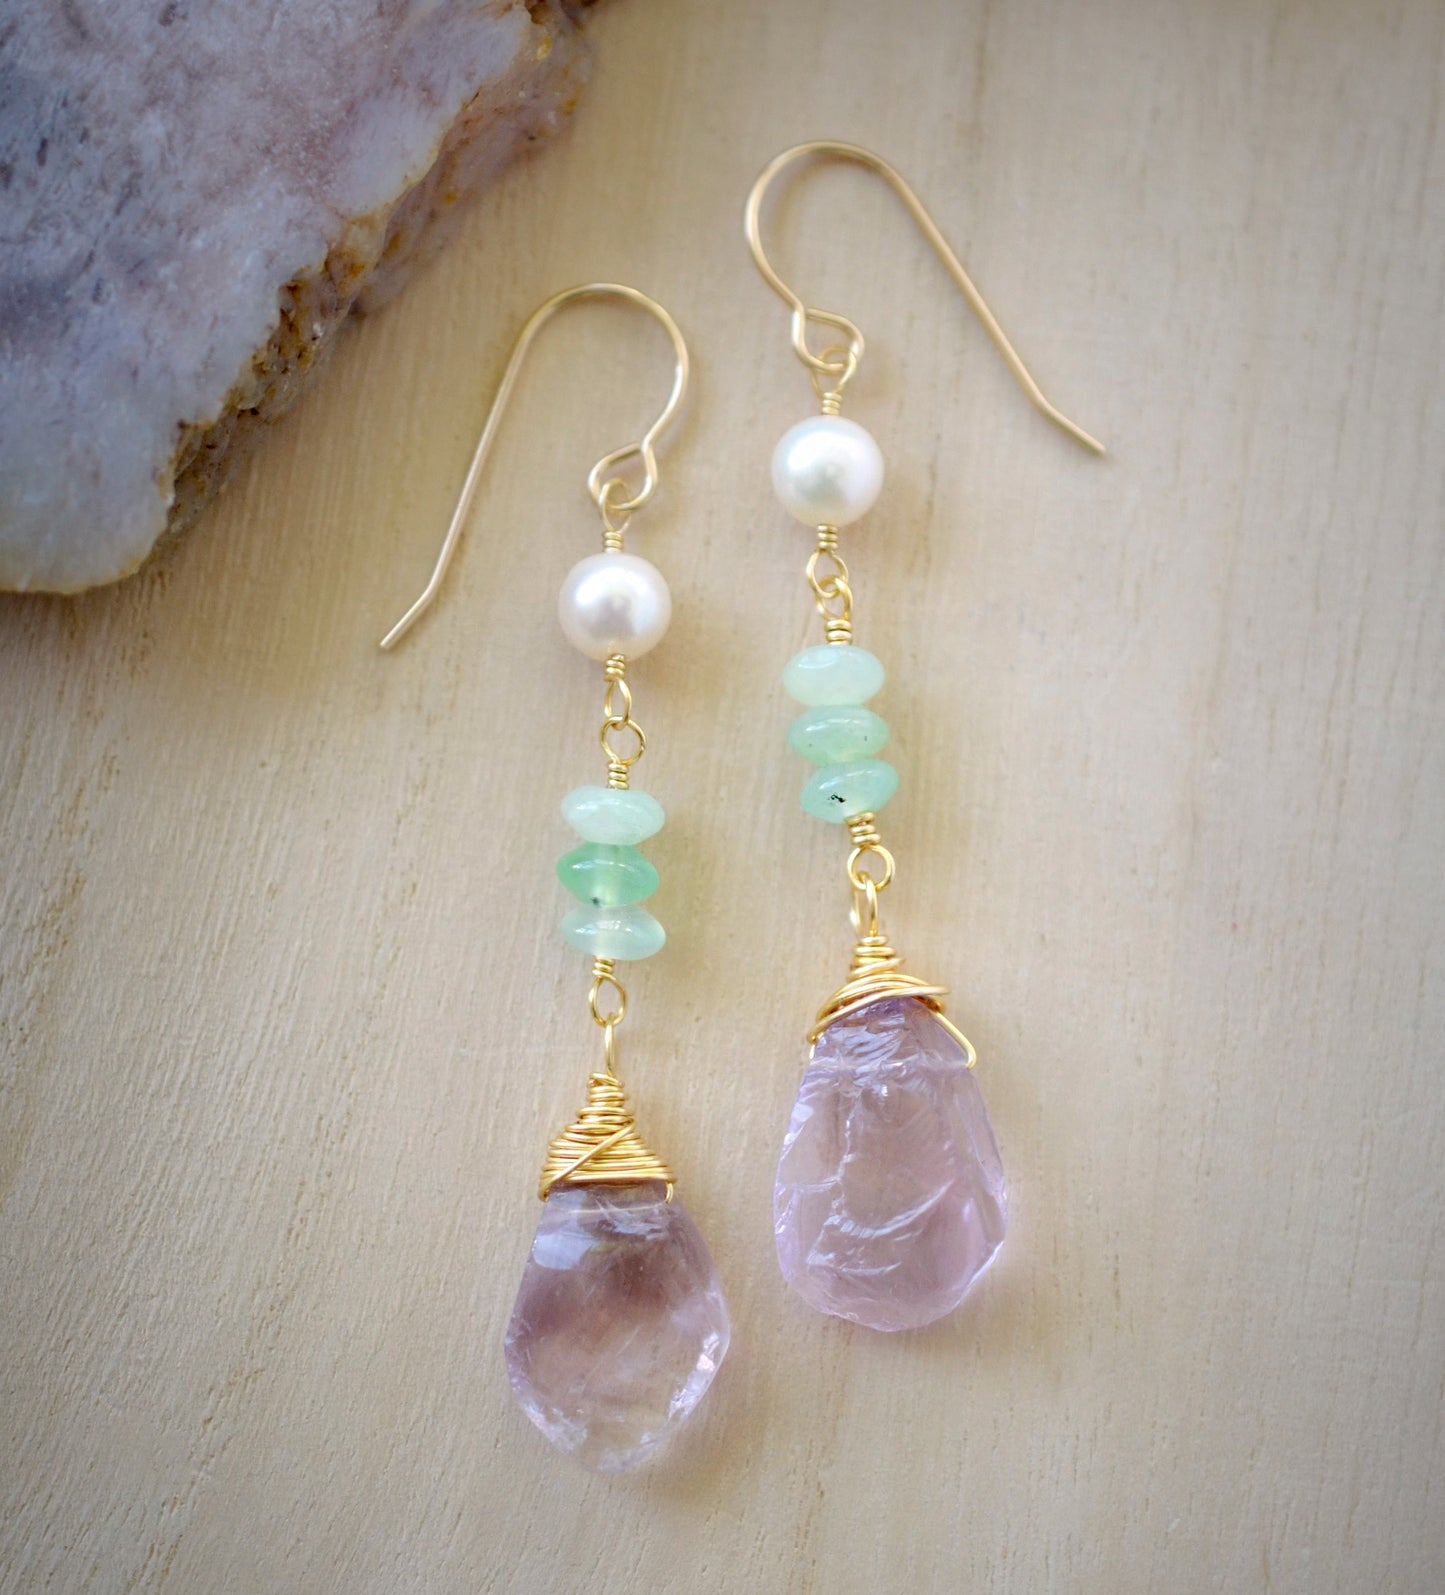 Detail image. Raw pale purple Amethyst gemstones dangle below three green chrysoprase stones and a single freshwater pearl. Shown in 14k gold filled. 